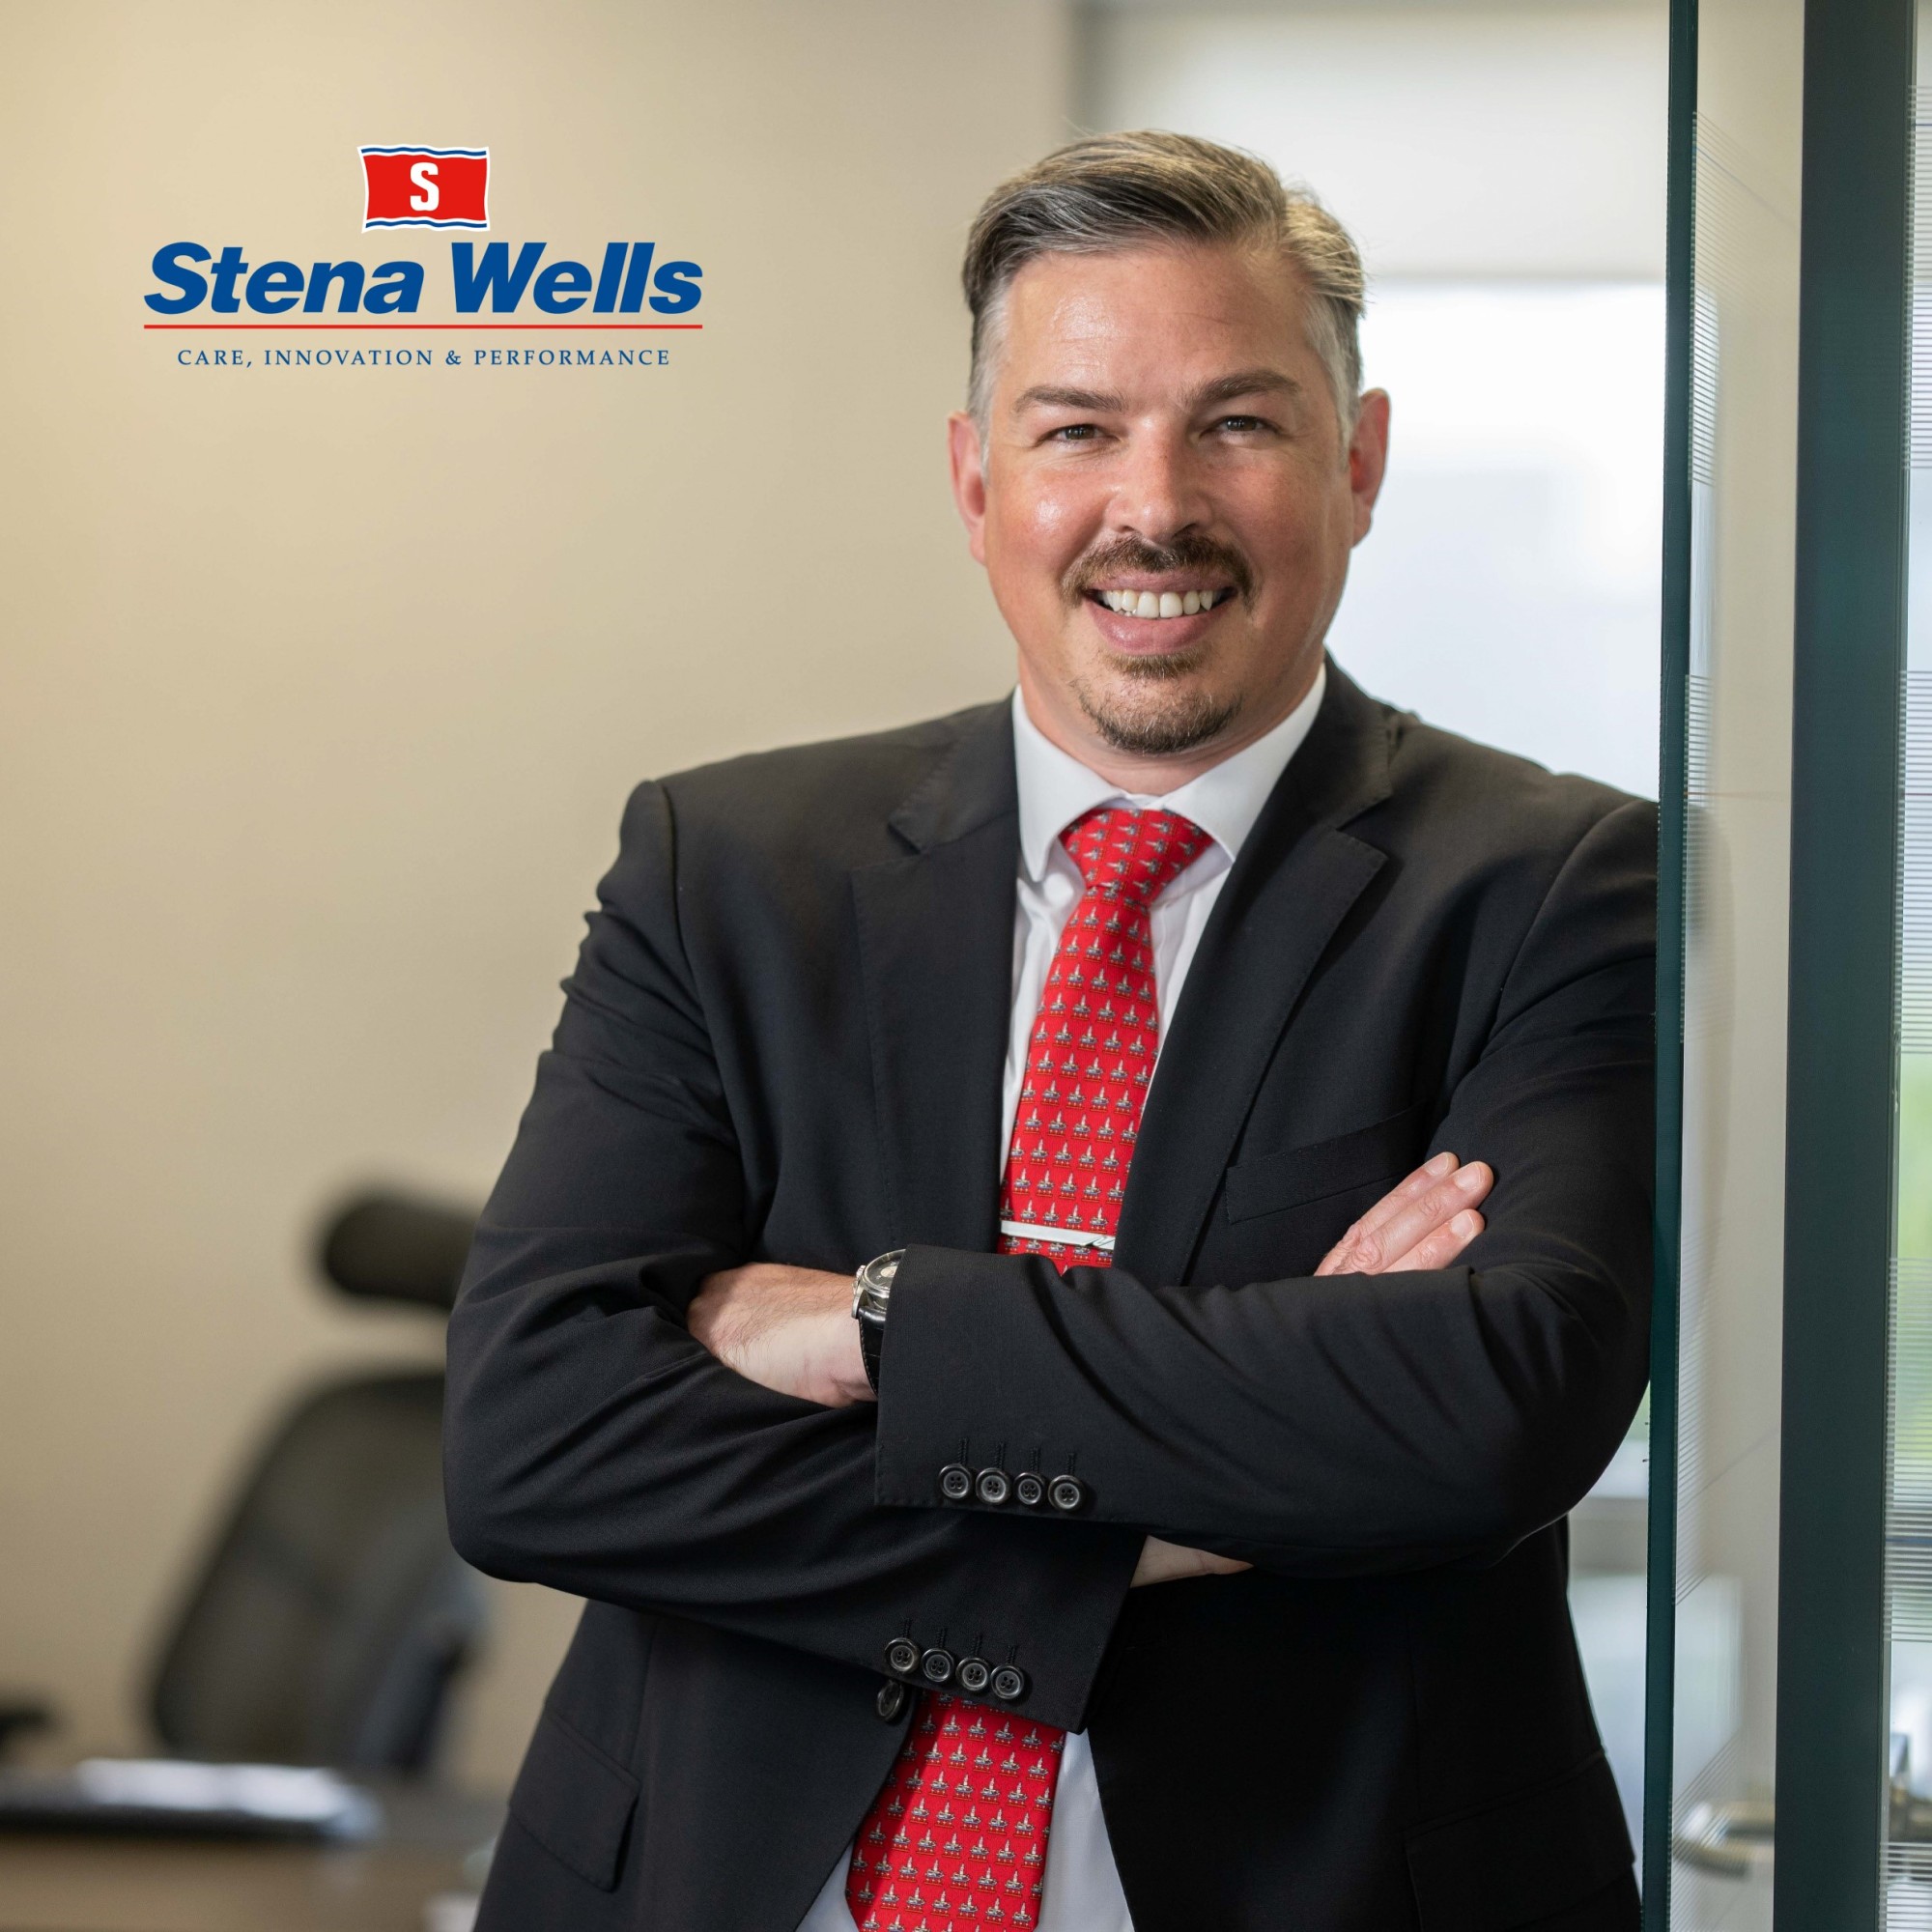 Stena Drilling names Dillan Perras as Wells Manager and Director of new start-up company.